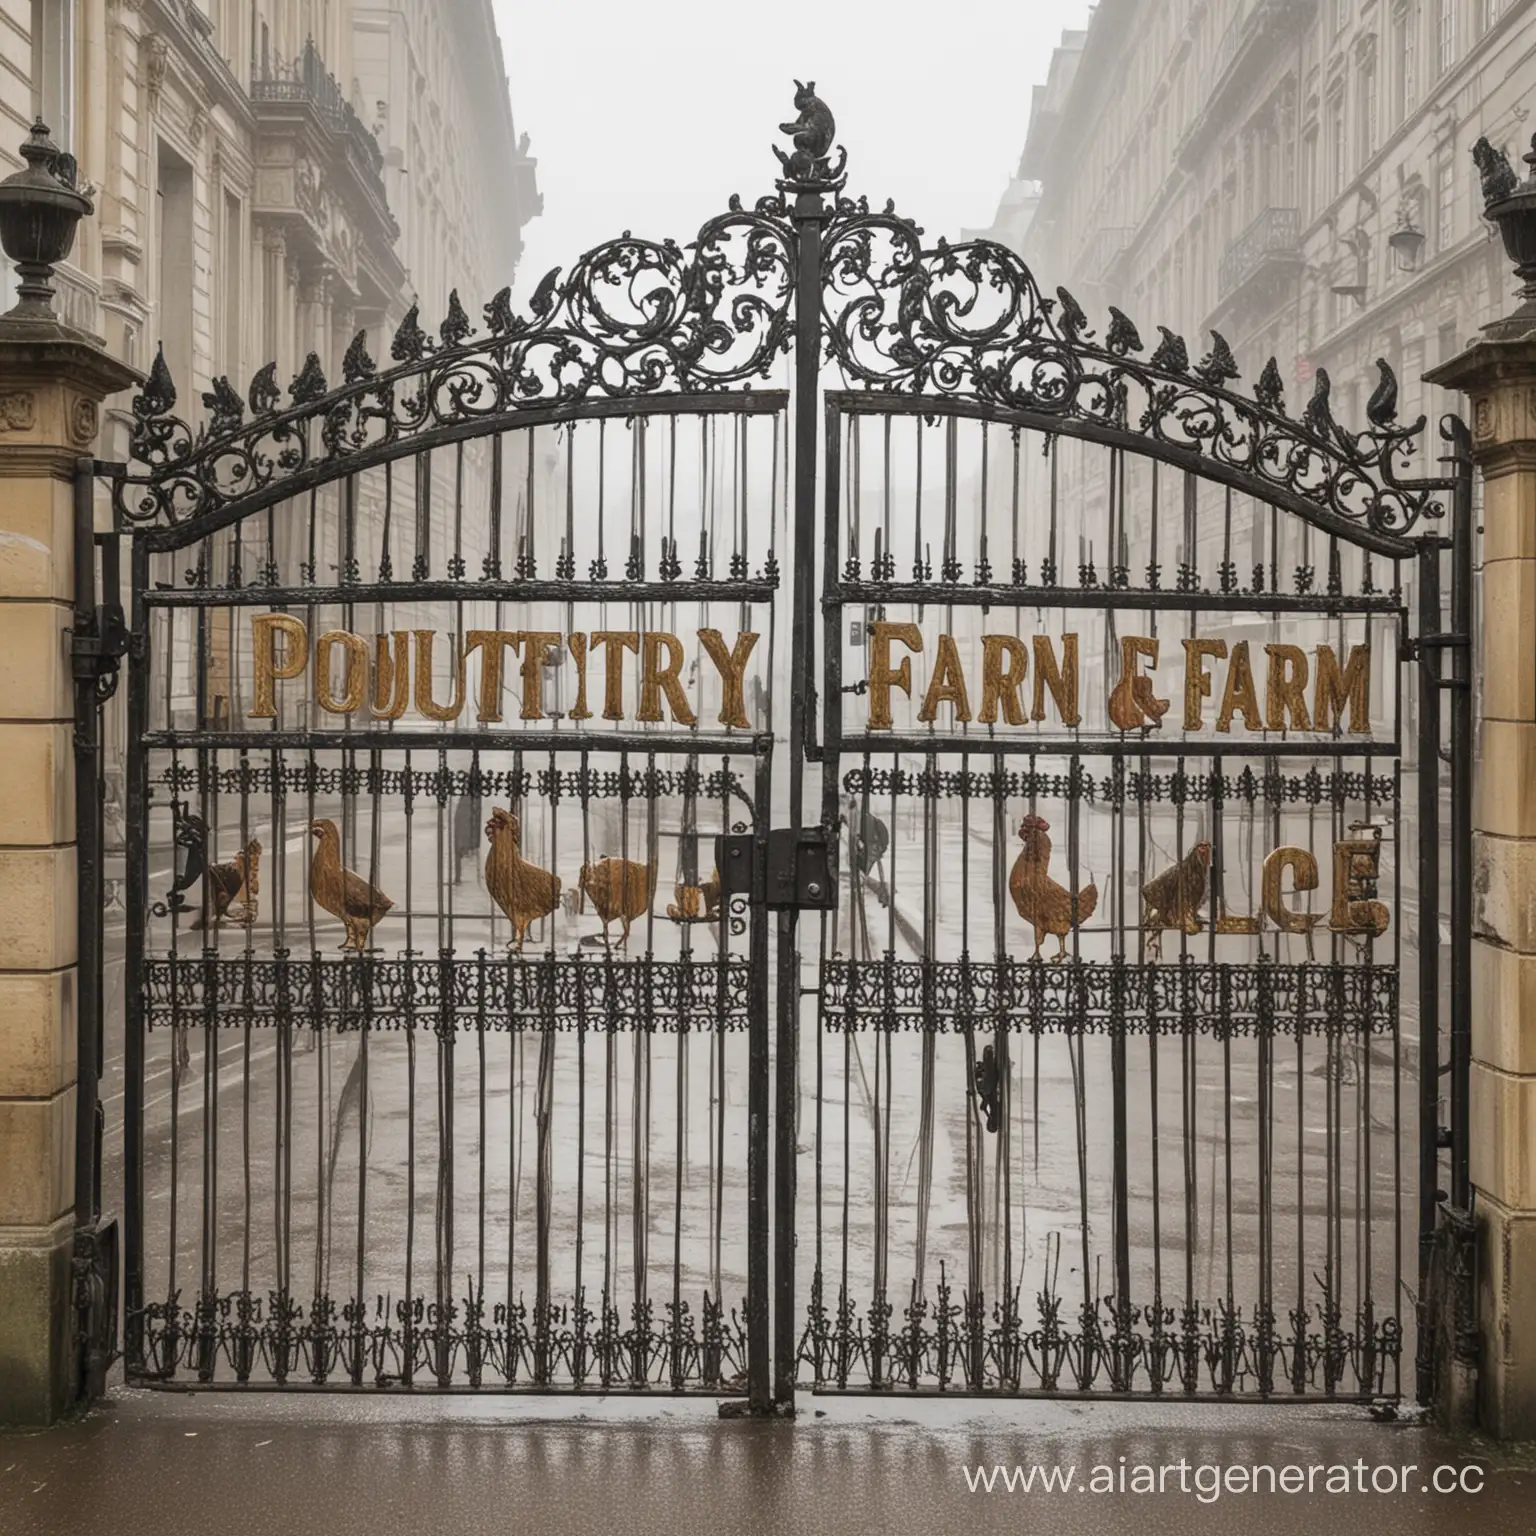 Rainy-Day-Scene-Poultry-Farm-Sign-at-the-Palace-Gates